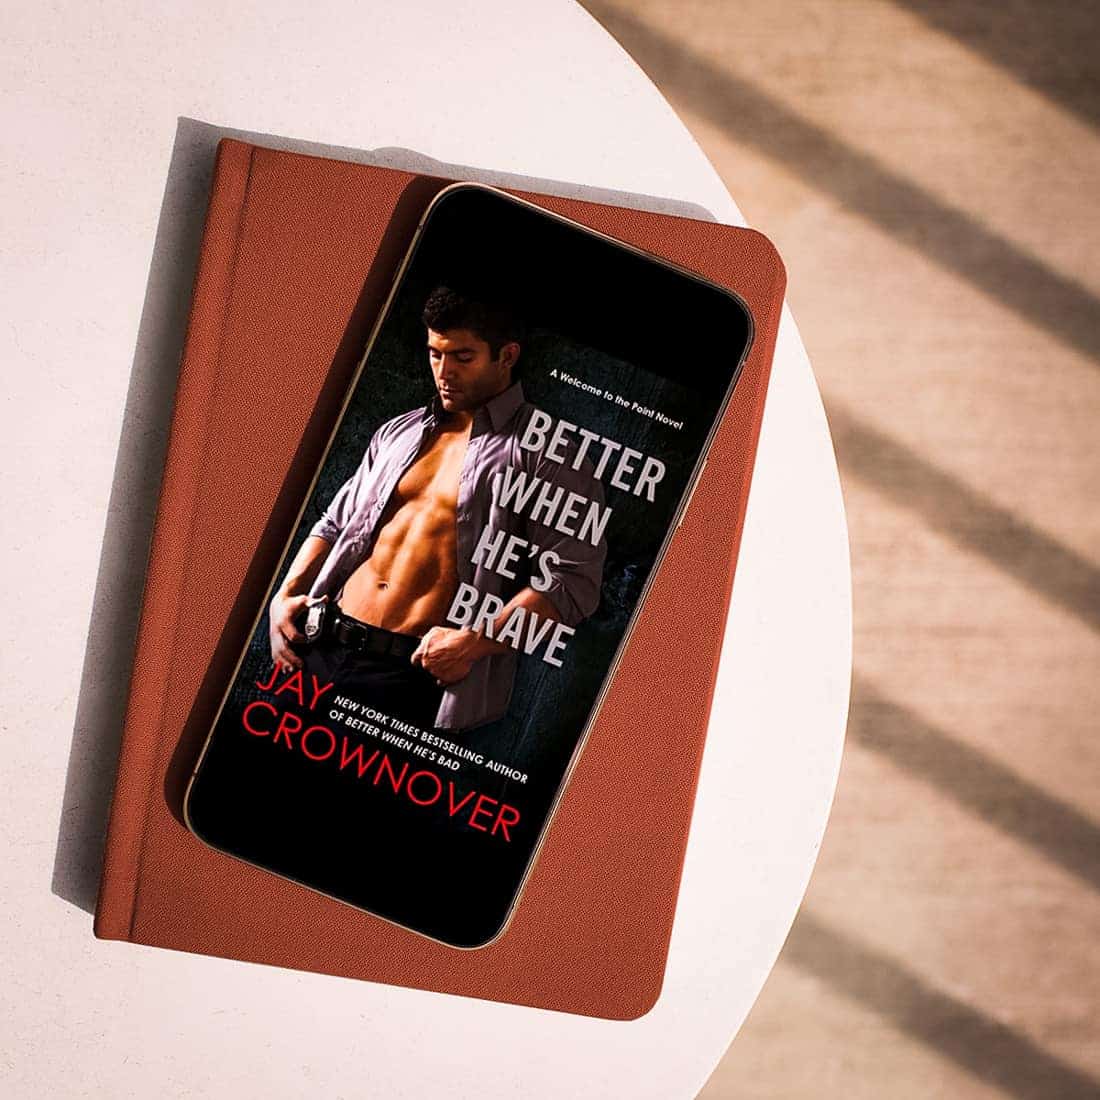 Better When He’s Brave by Jay Crownover – Welcome to the Point Book 3